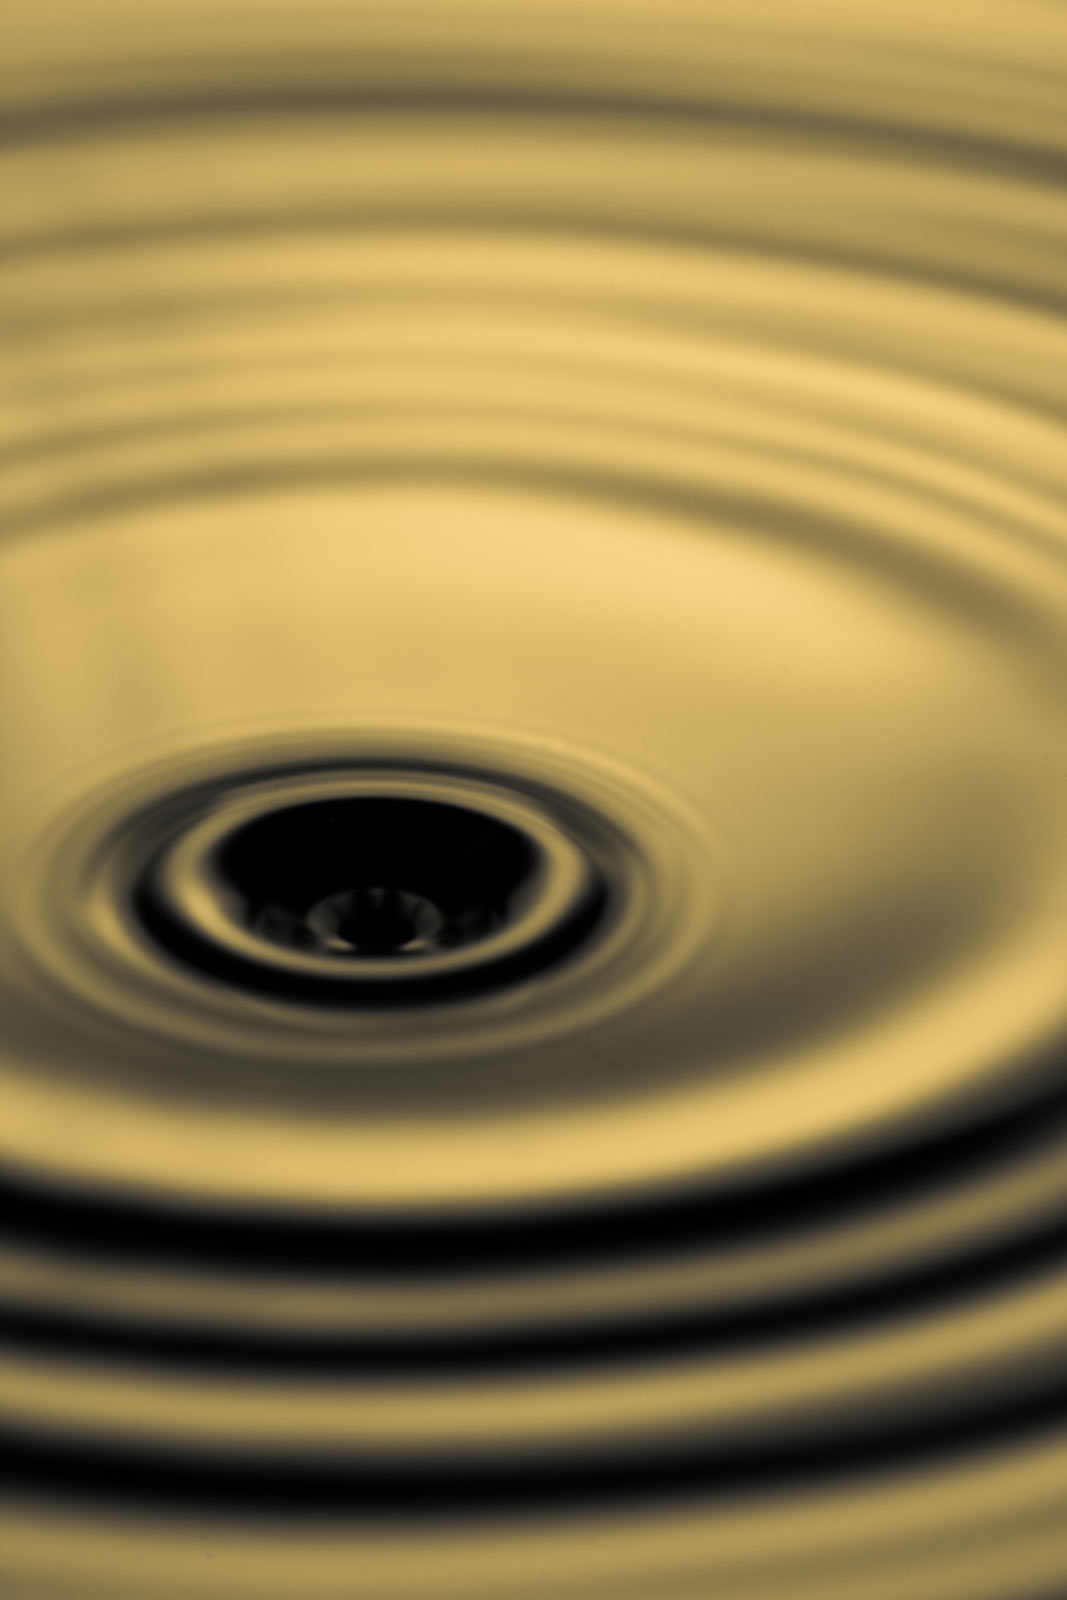 Water ripple with a yellowish hue on the water.